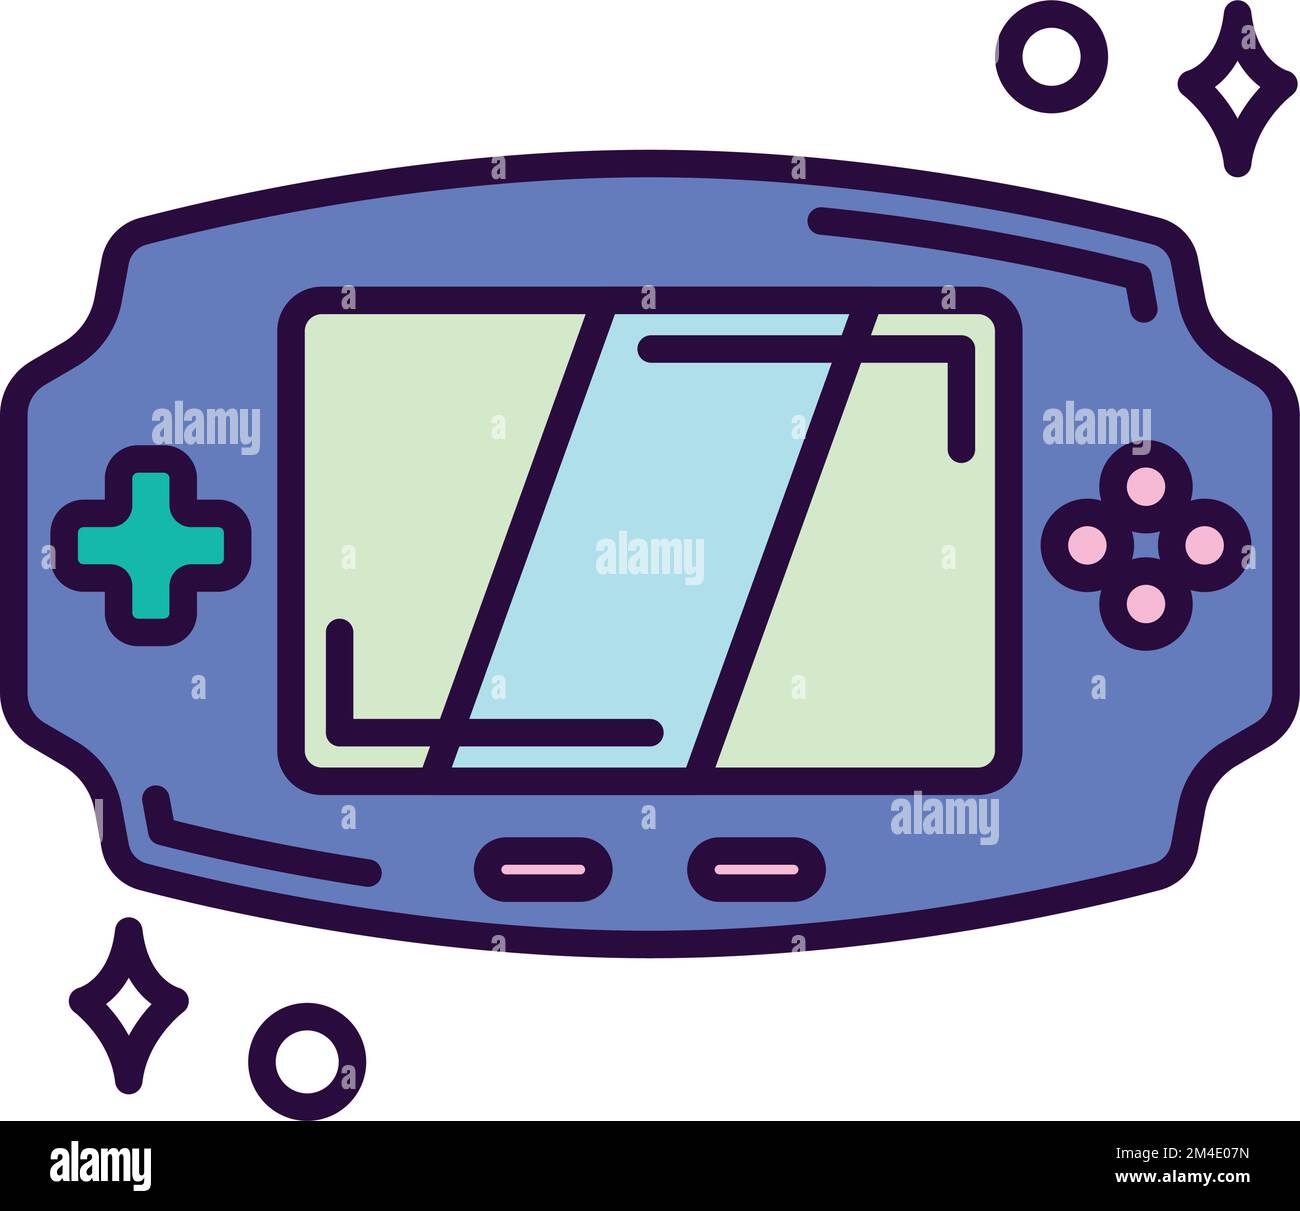 Isolated cute portable videogame console toy icon Vector Stock Vector